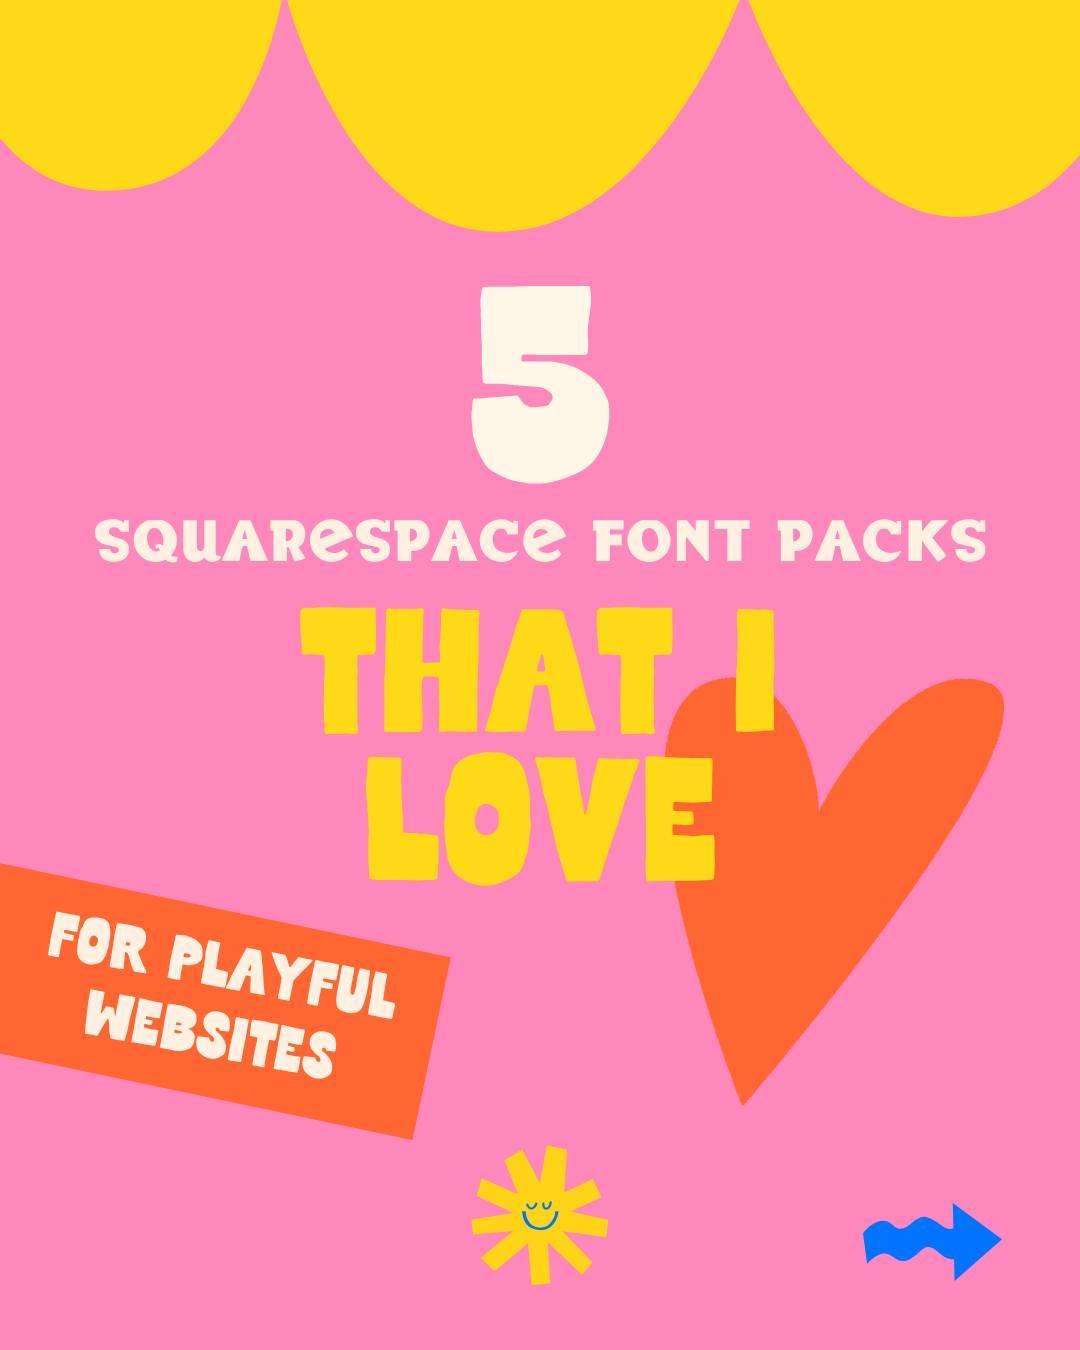 Did you know Squarespace have loads of fantastic Font Packs ready to use? ⁠
⁠
Just select your favourite, try it on for size and if it doesn't fit your brand, there are plenty of others to play around with! ⁠
⁠
Now there's no need to spend time brows